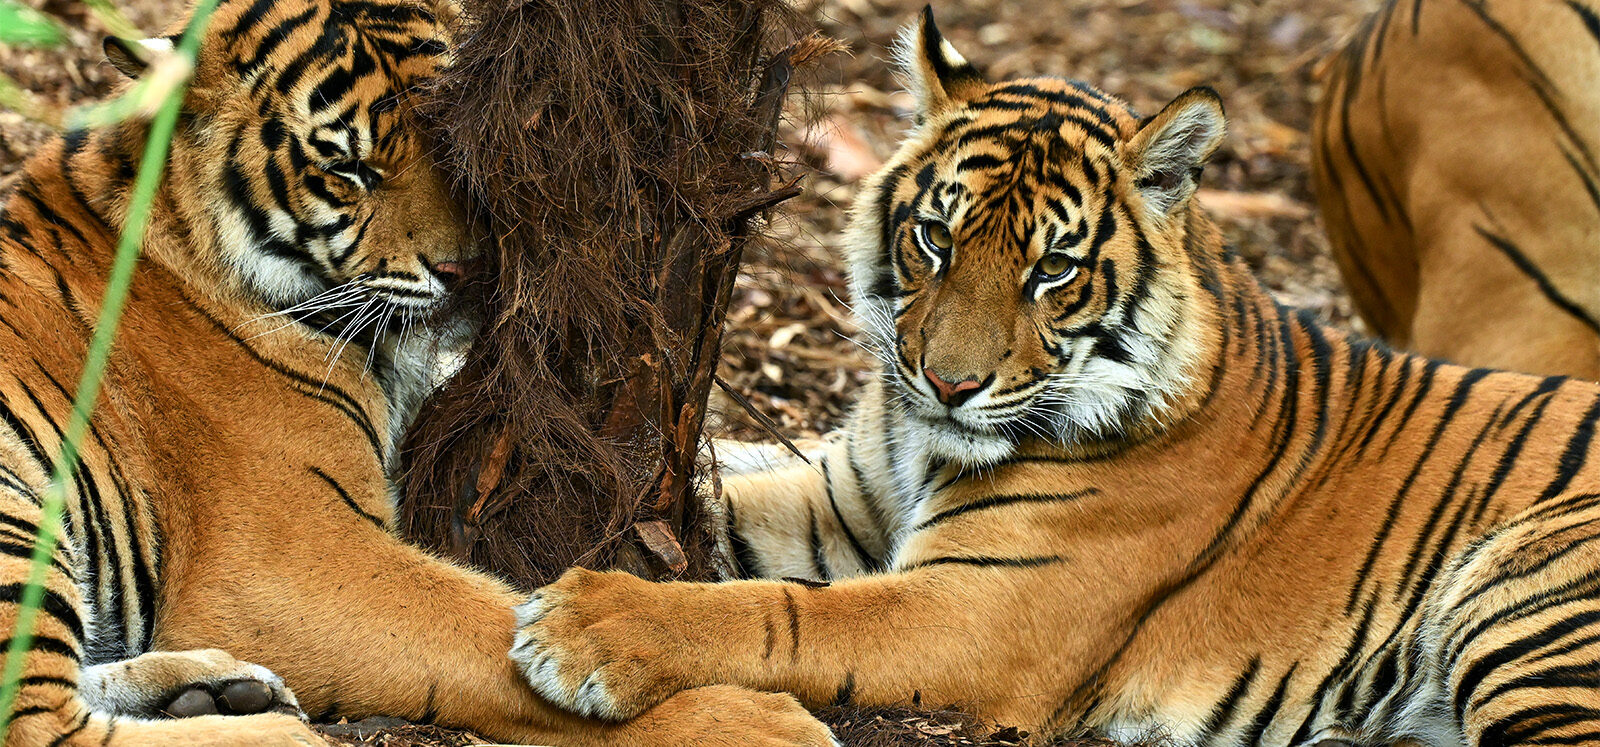 Sumatran Tiger lying on forest floor with paw on top of another Sumatran Tiger's leg as they rest their head against a tree